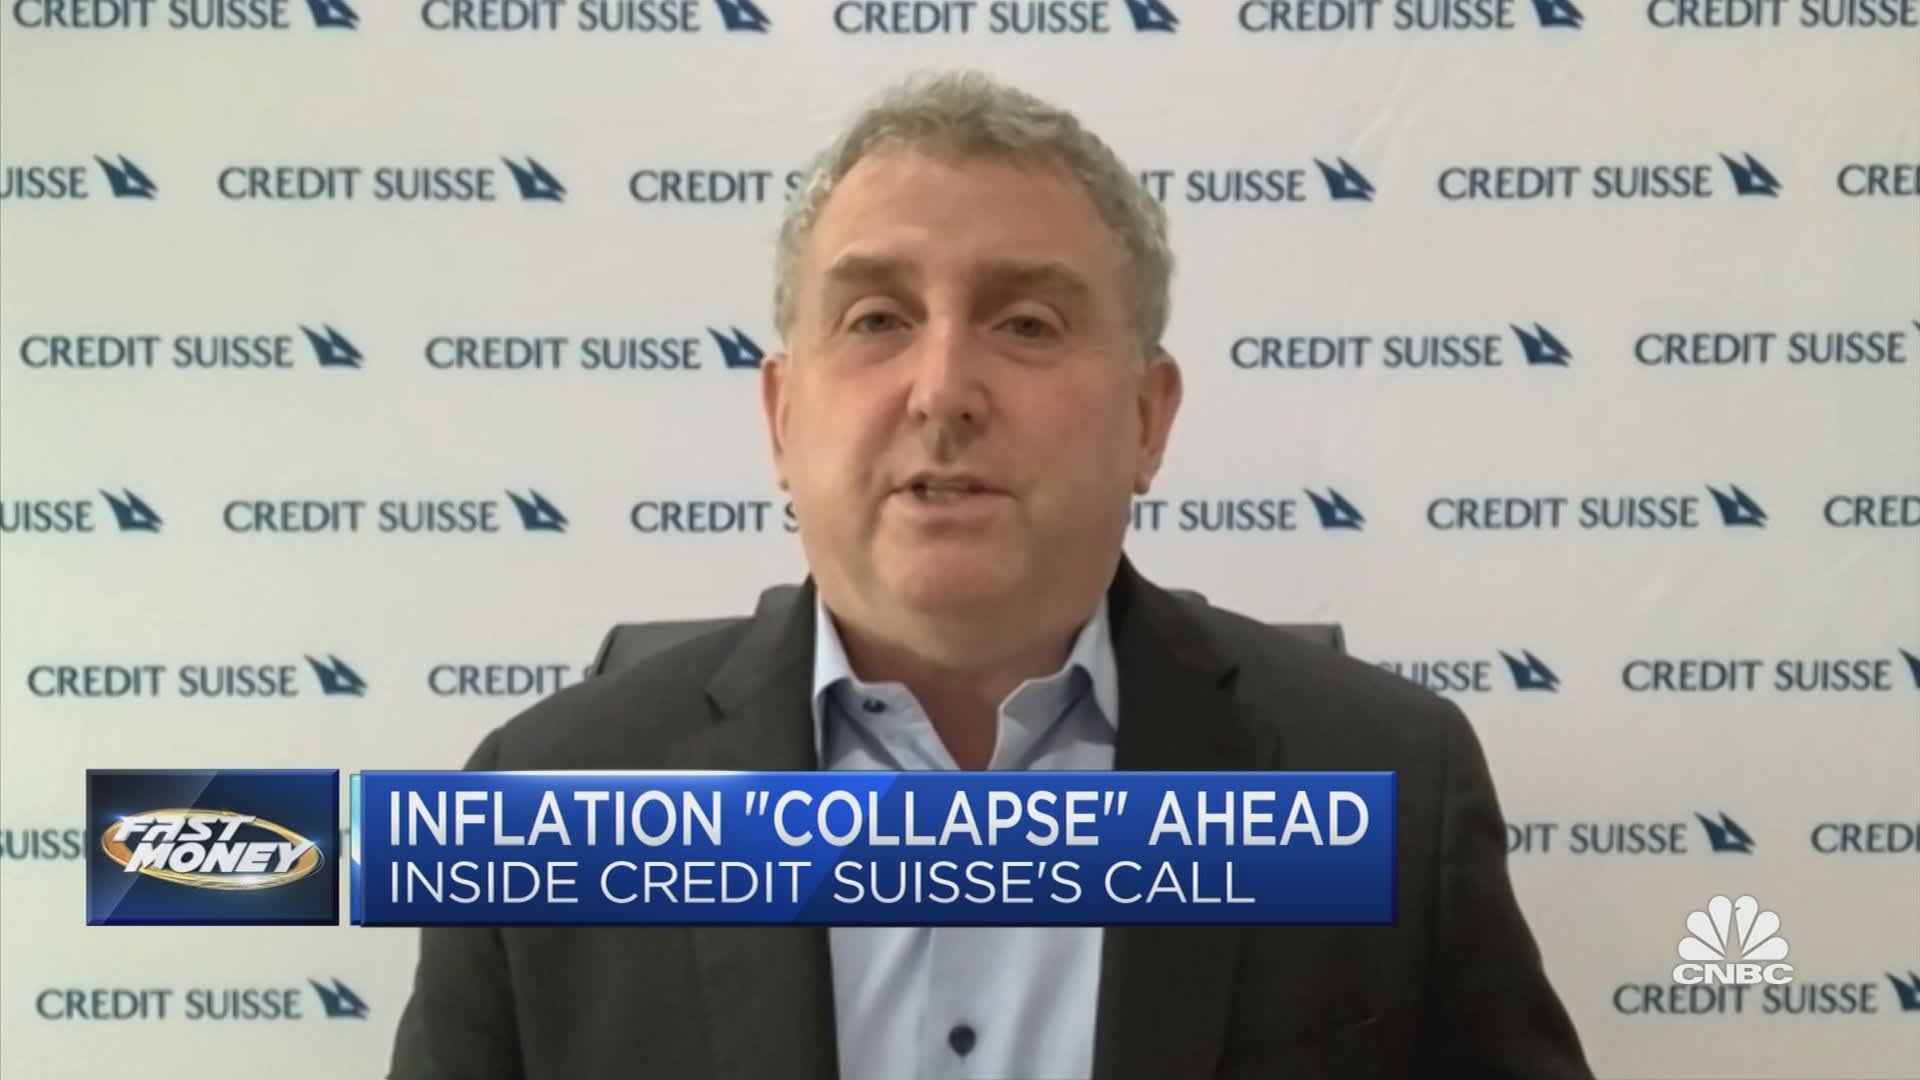 Major market rally ahead due to inflation 'collapse,' predicts Credit Suisse